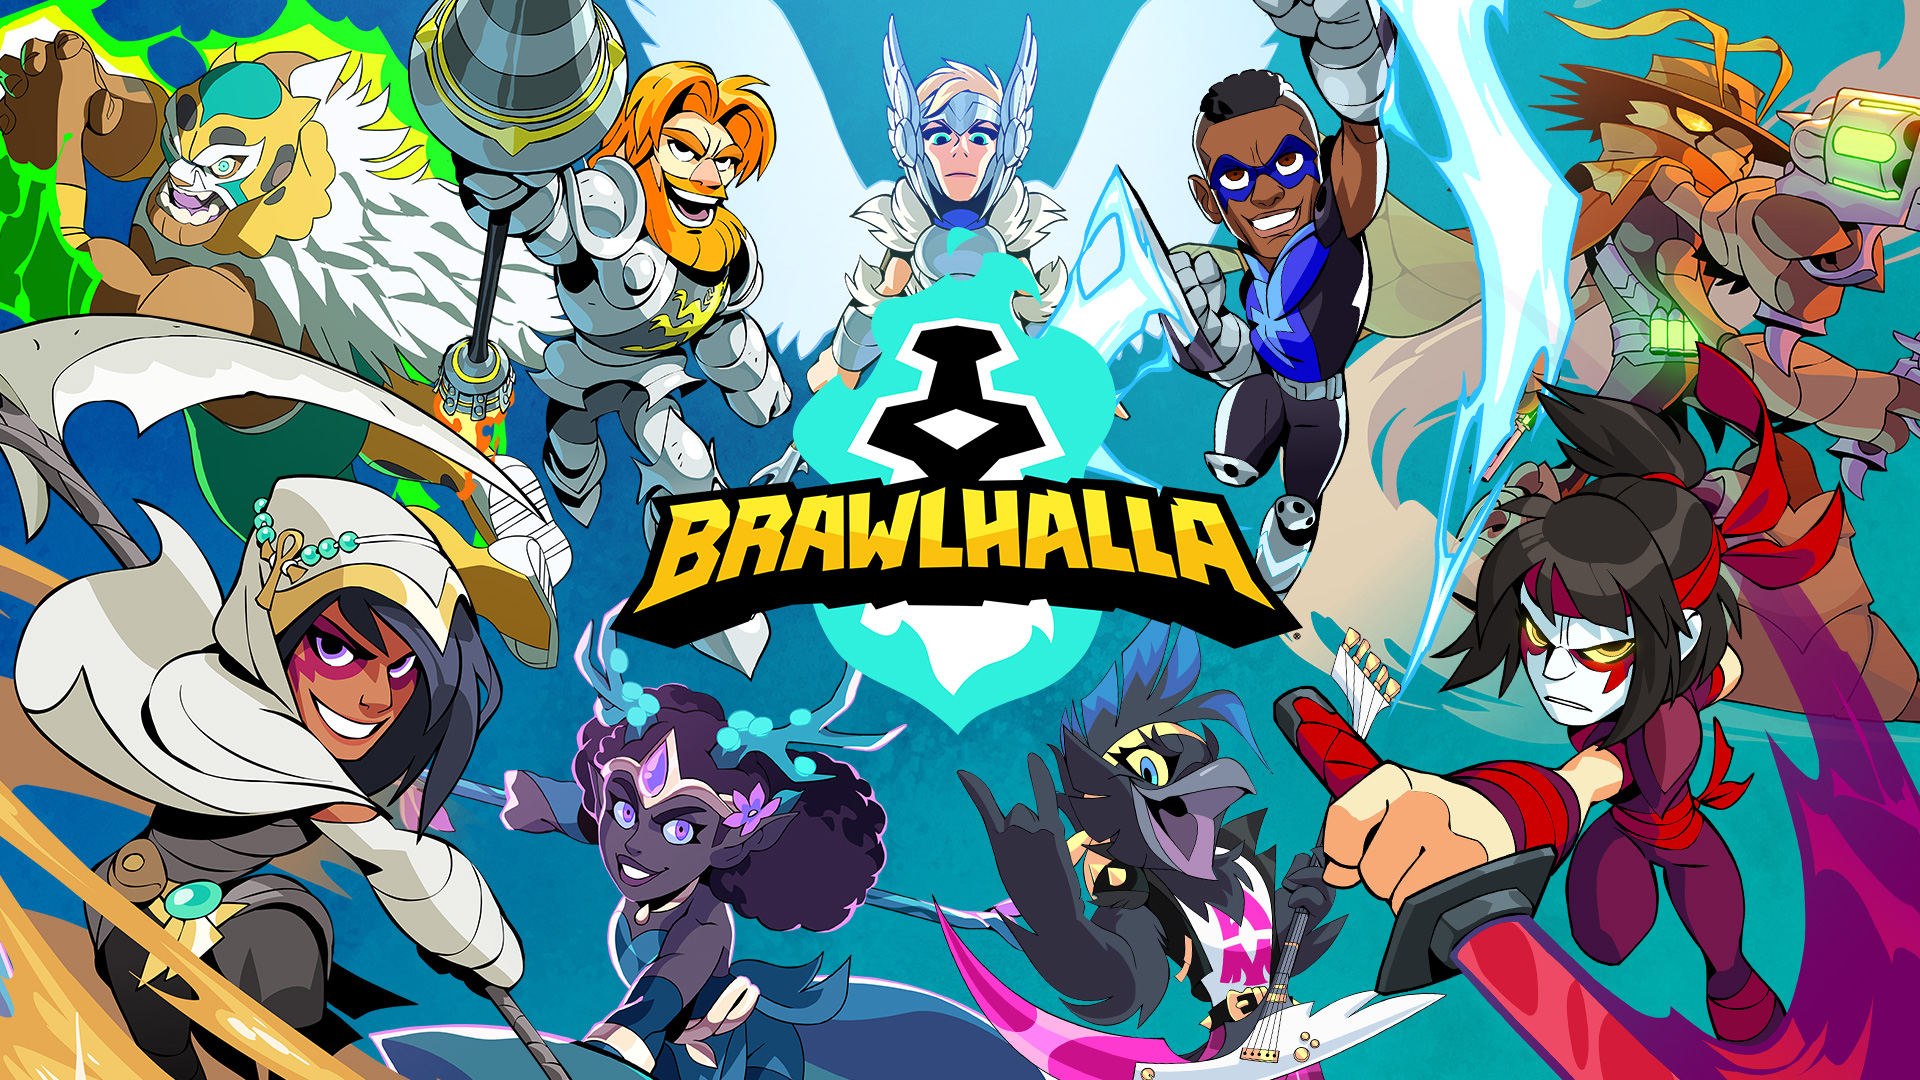 Here is the Brawlhalla Patch 8.04 Balance Preview